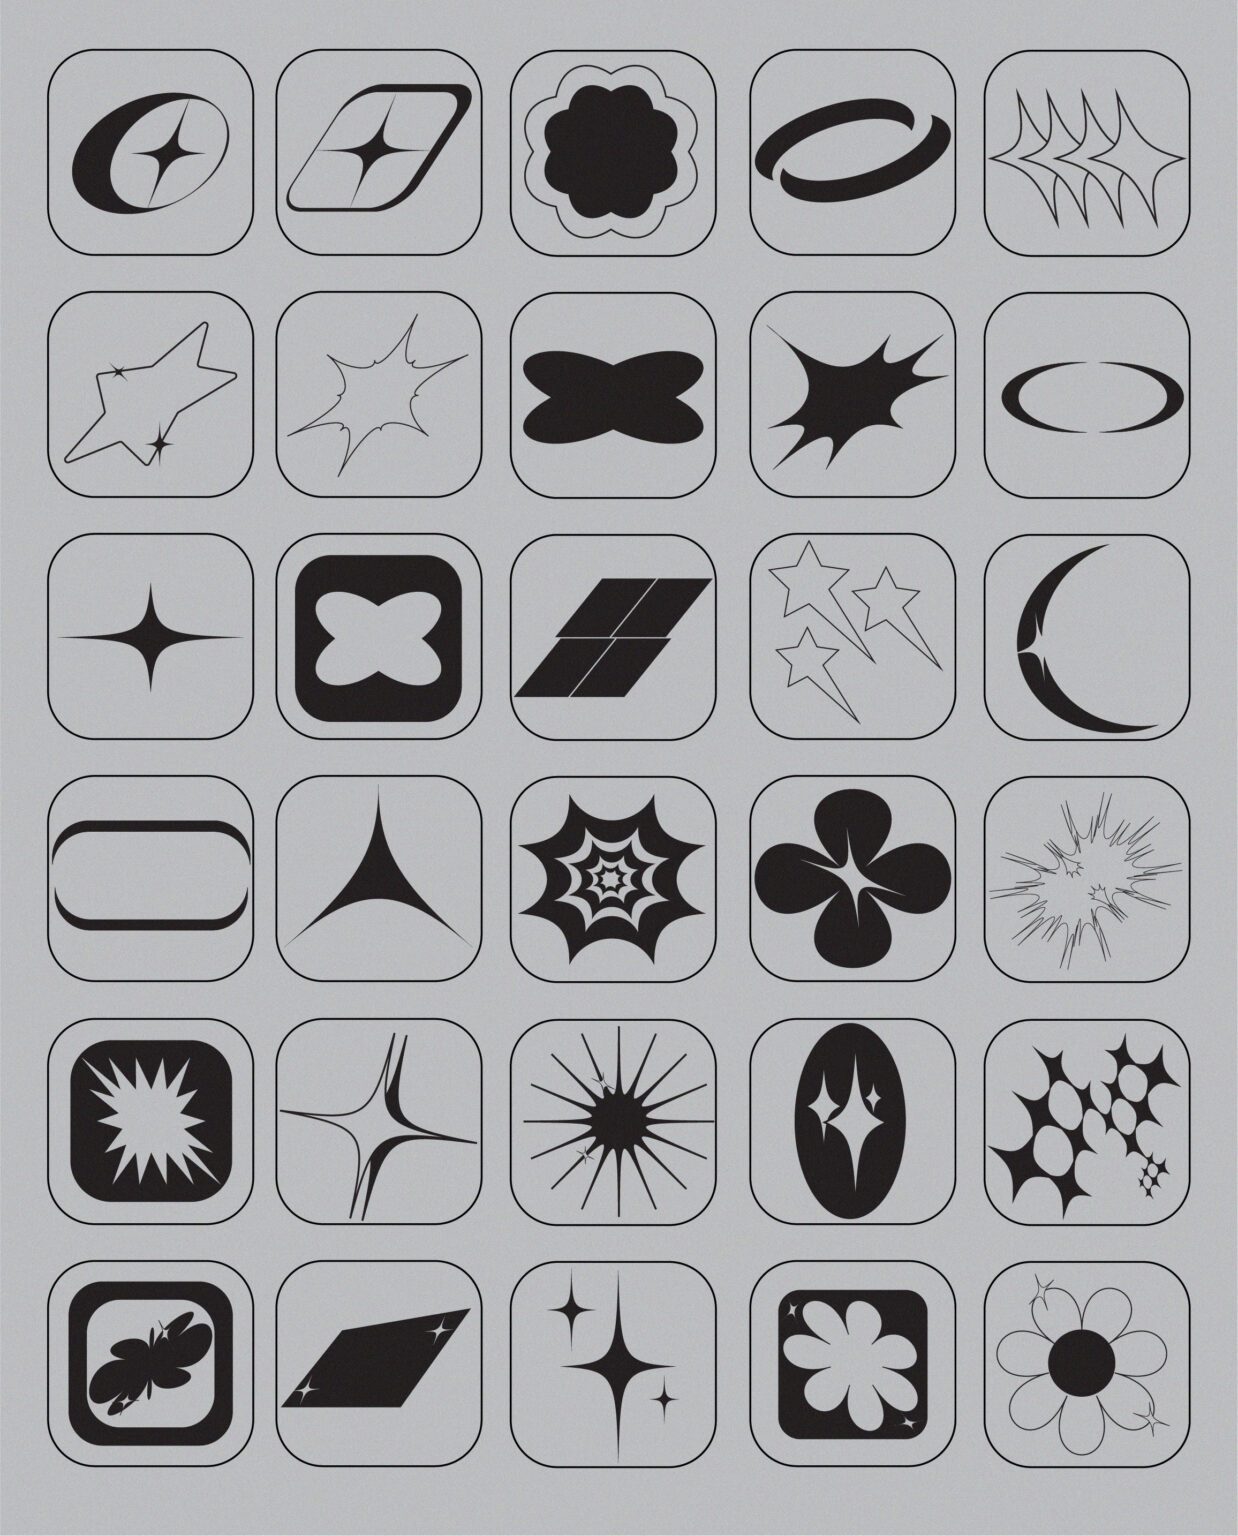 Design Elements Pack #8: Y2K Shapes - 100 Pieces » Dirtybarn